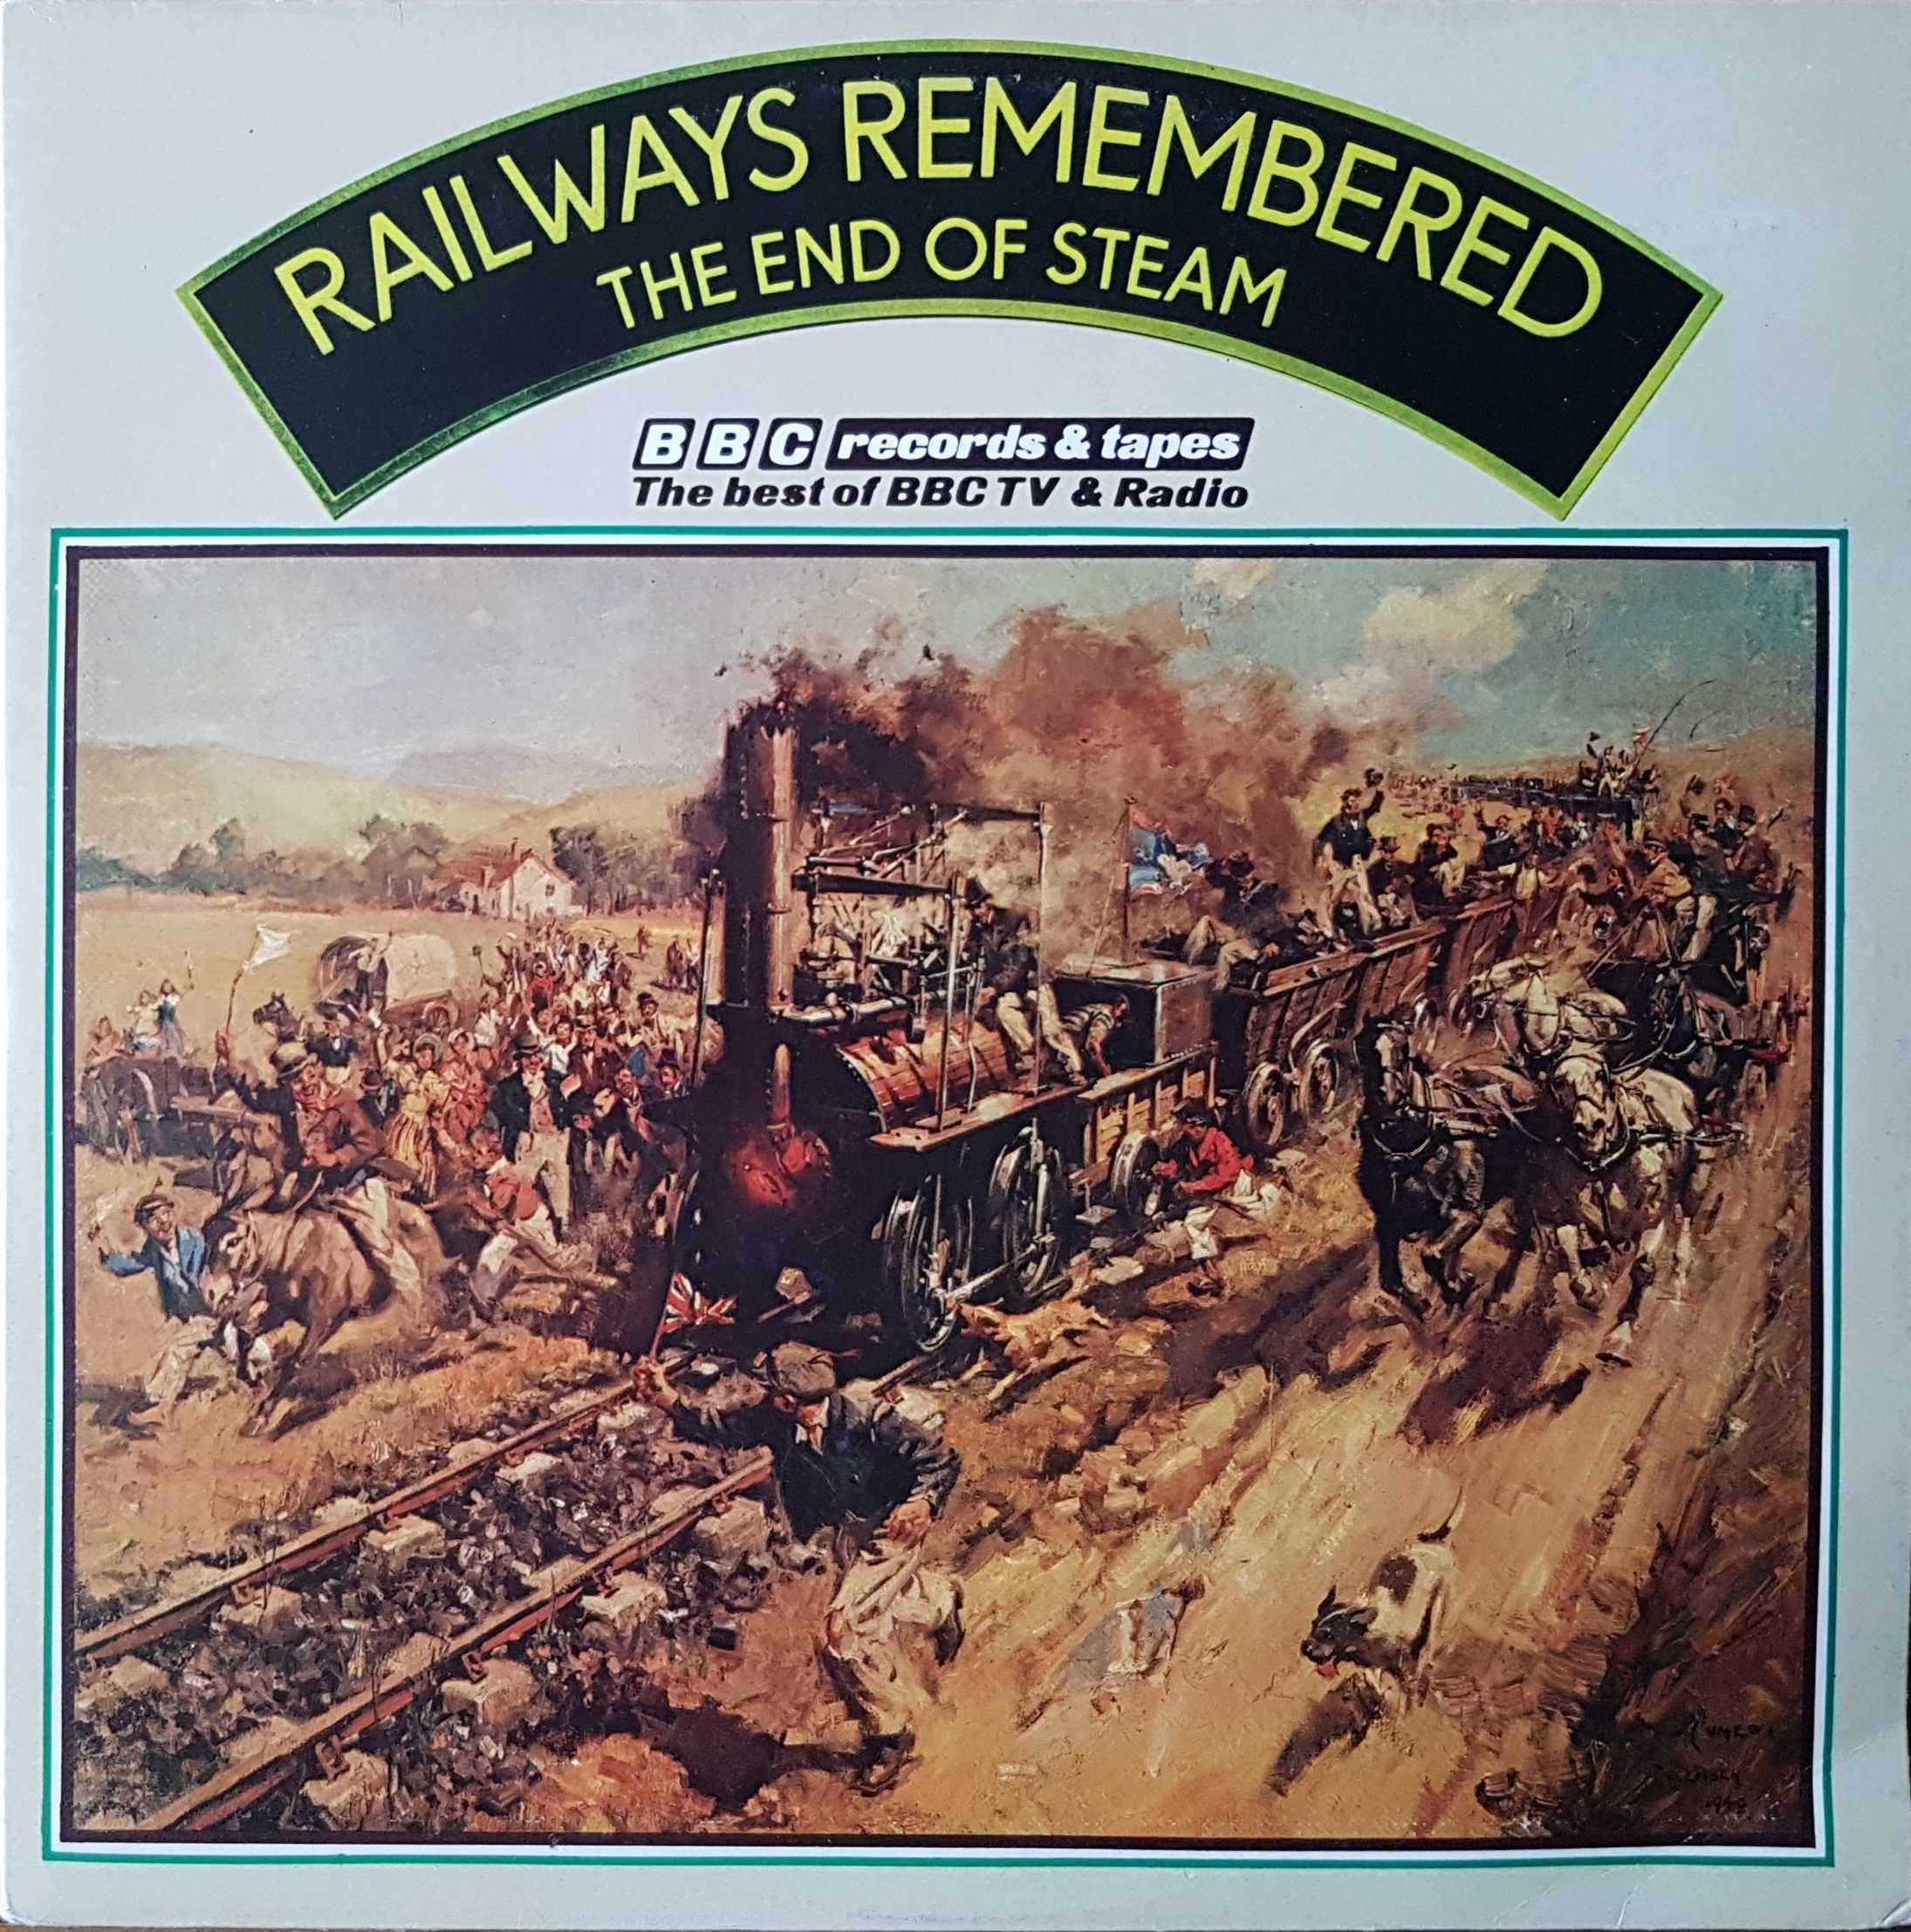 Picture of REF 190 Railways remembered / The end of steam double album by artist Various from the BBC albums - Records and Tapes library